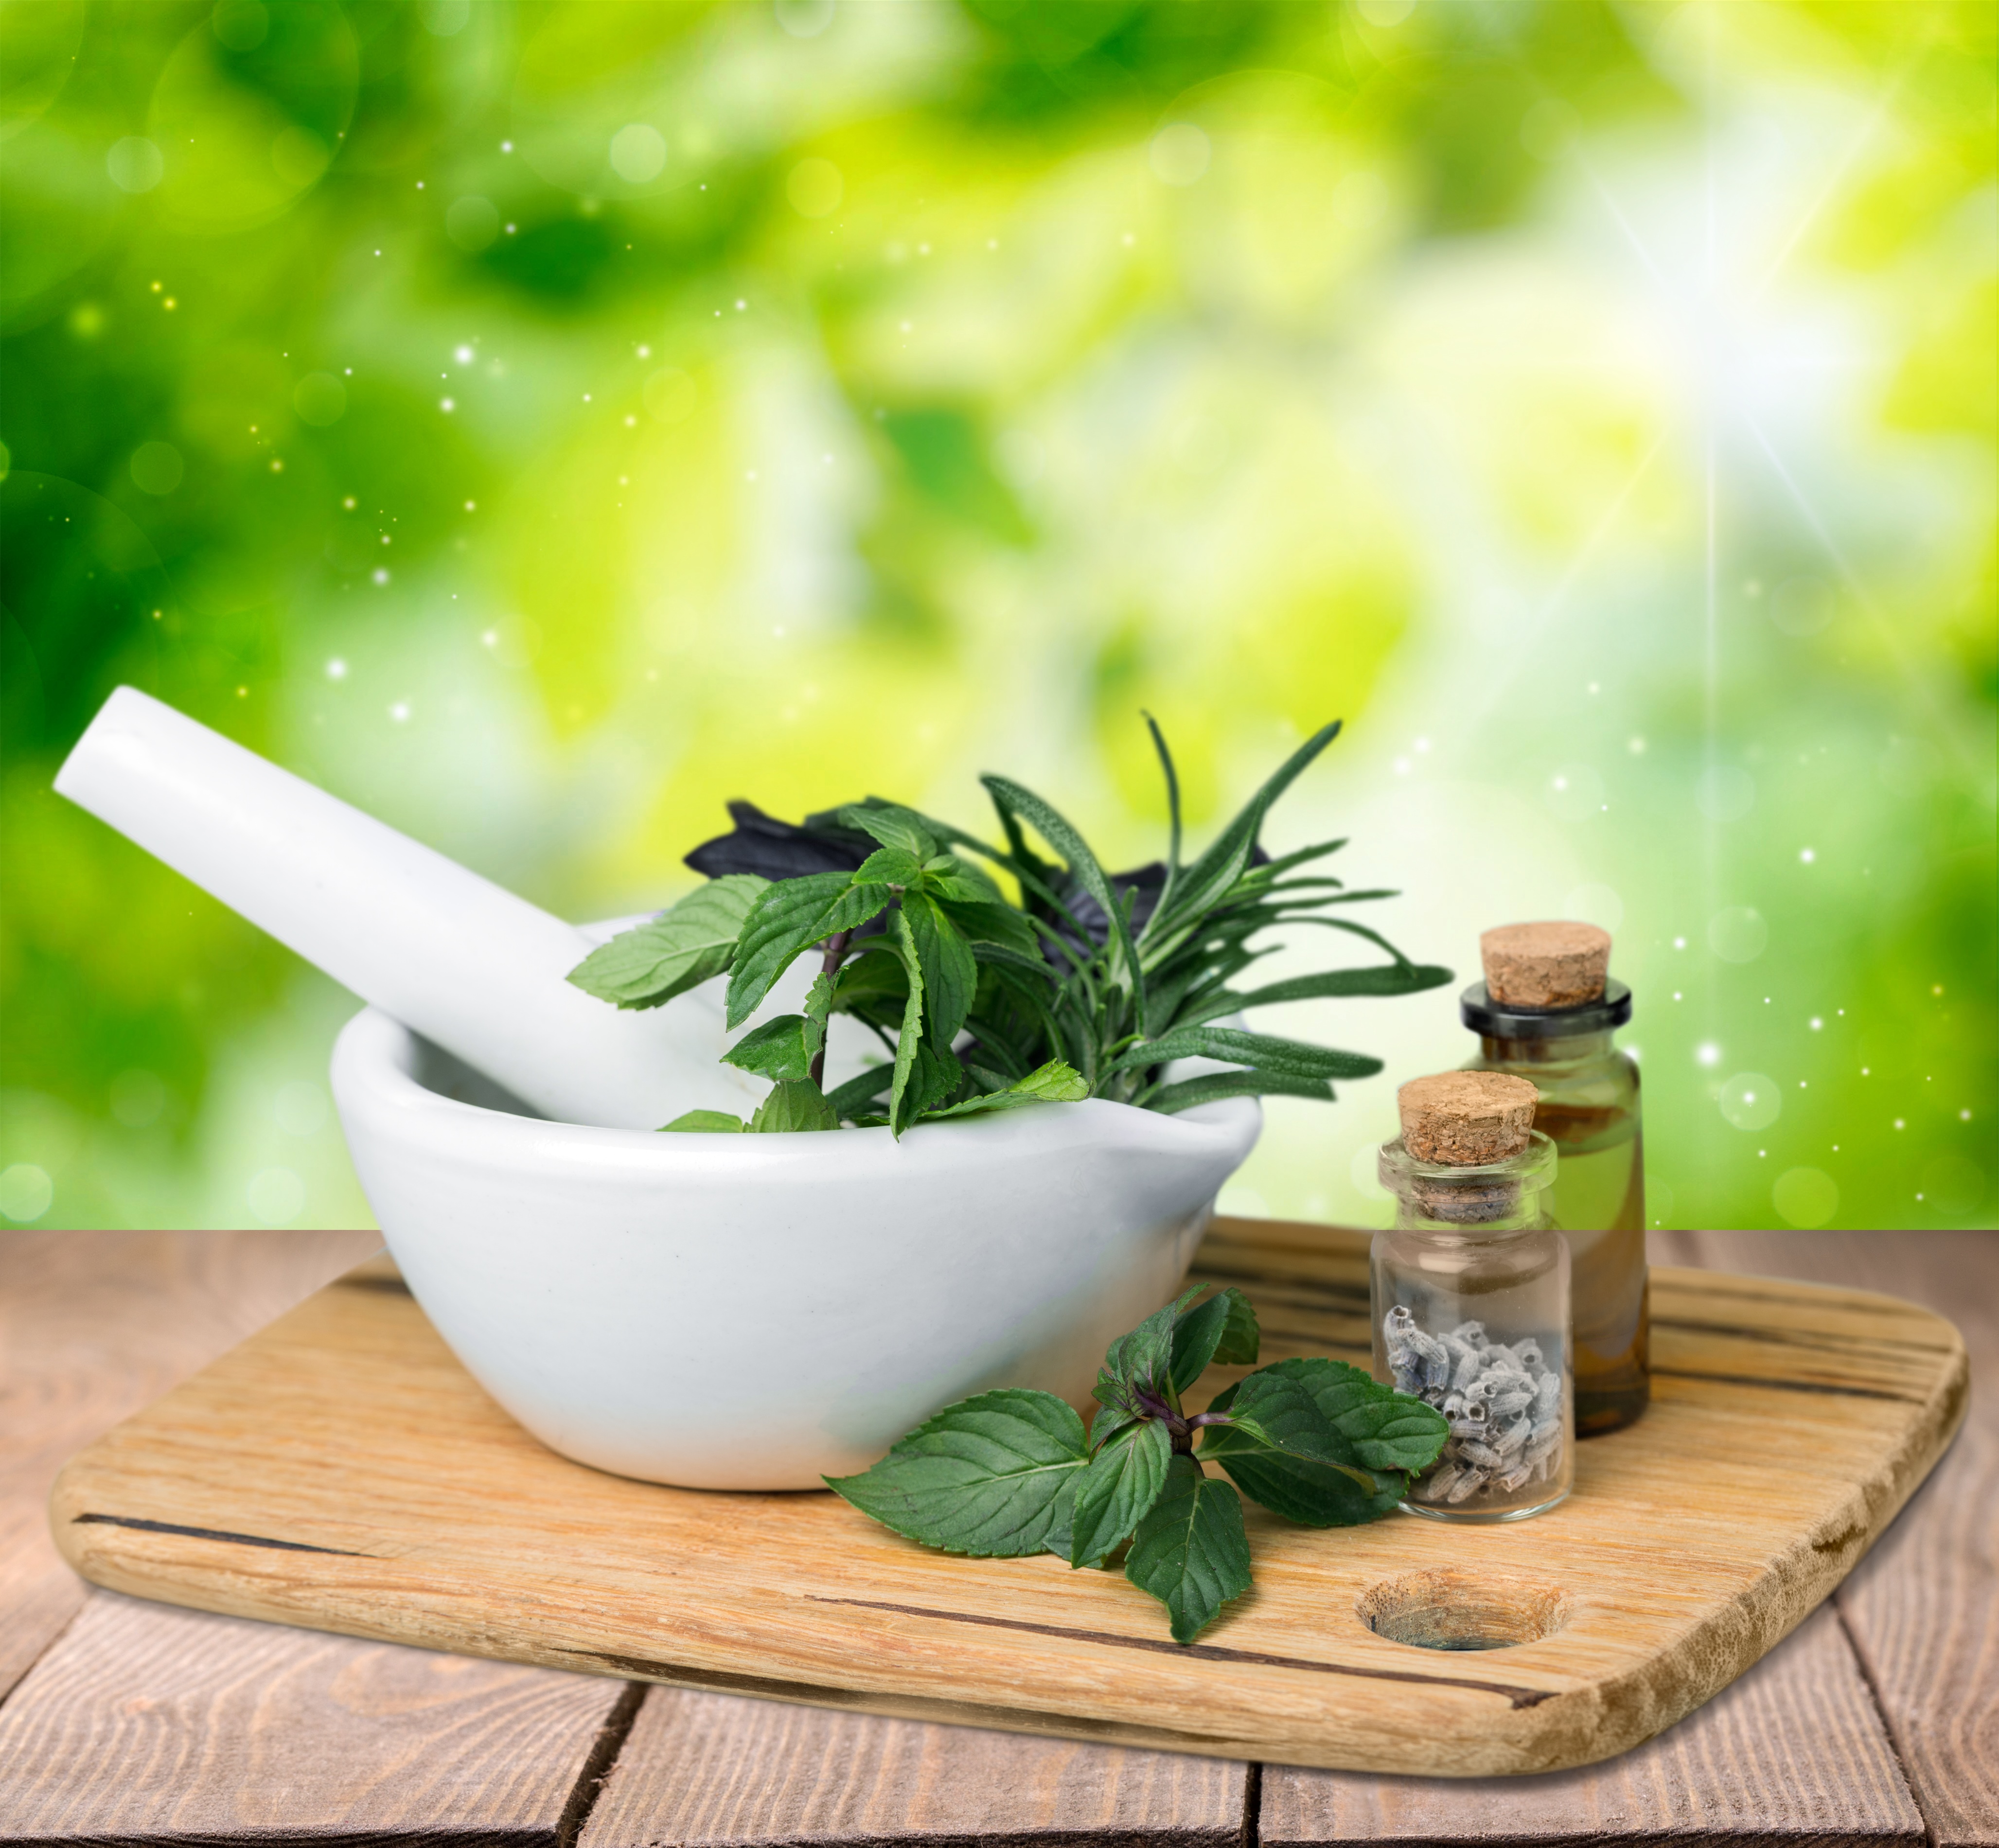 5 Healing Herbs and Their Benefits